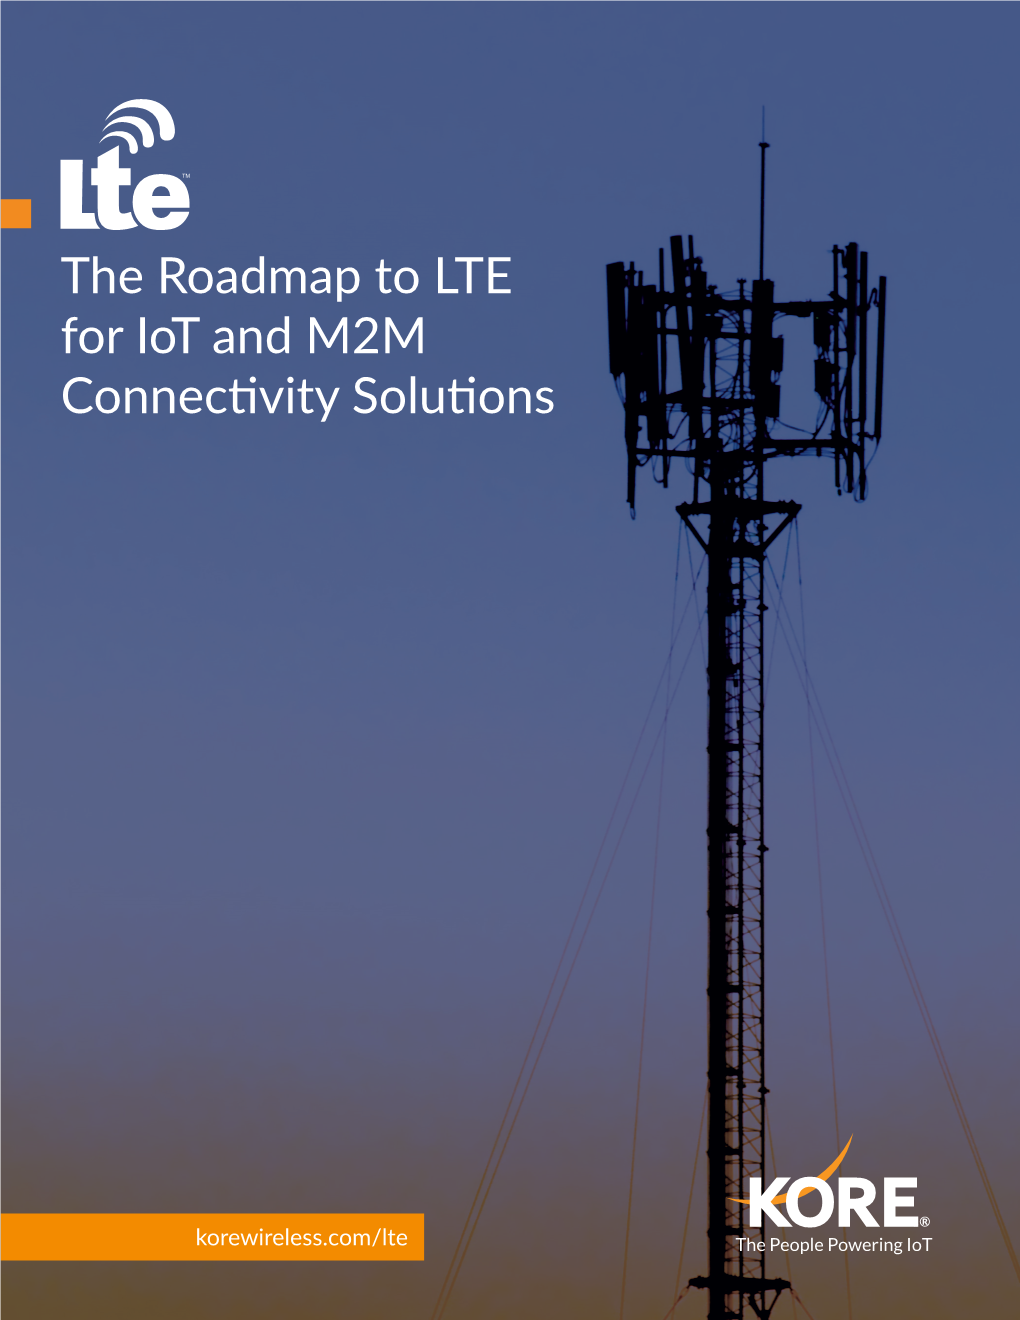 The Roadmap to LTE for Iot and M2M Connectivity Solutions